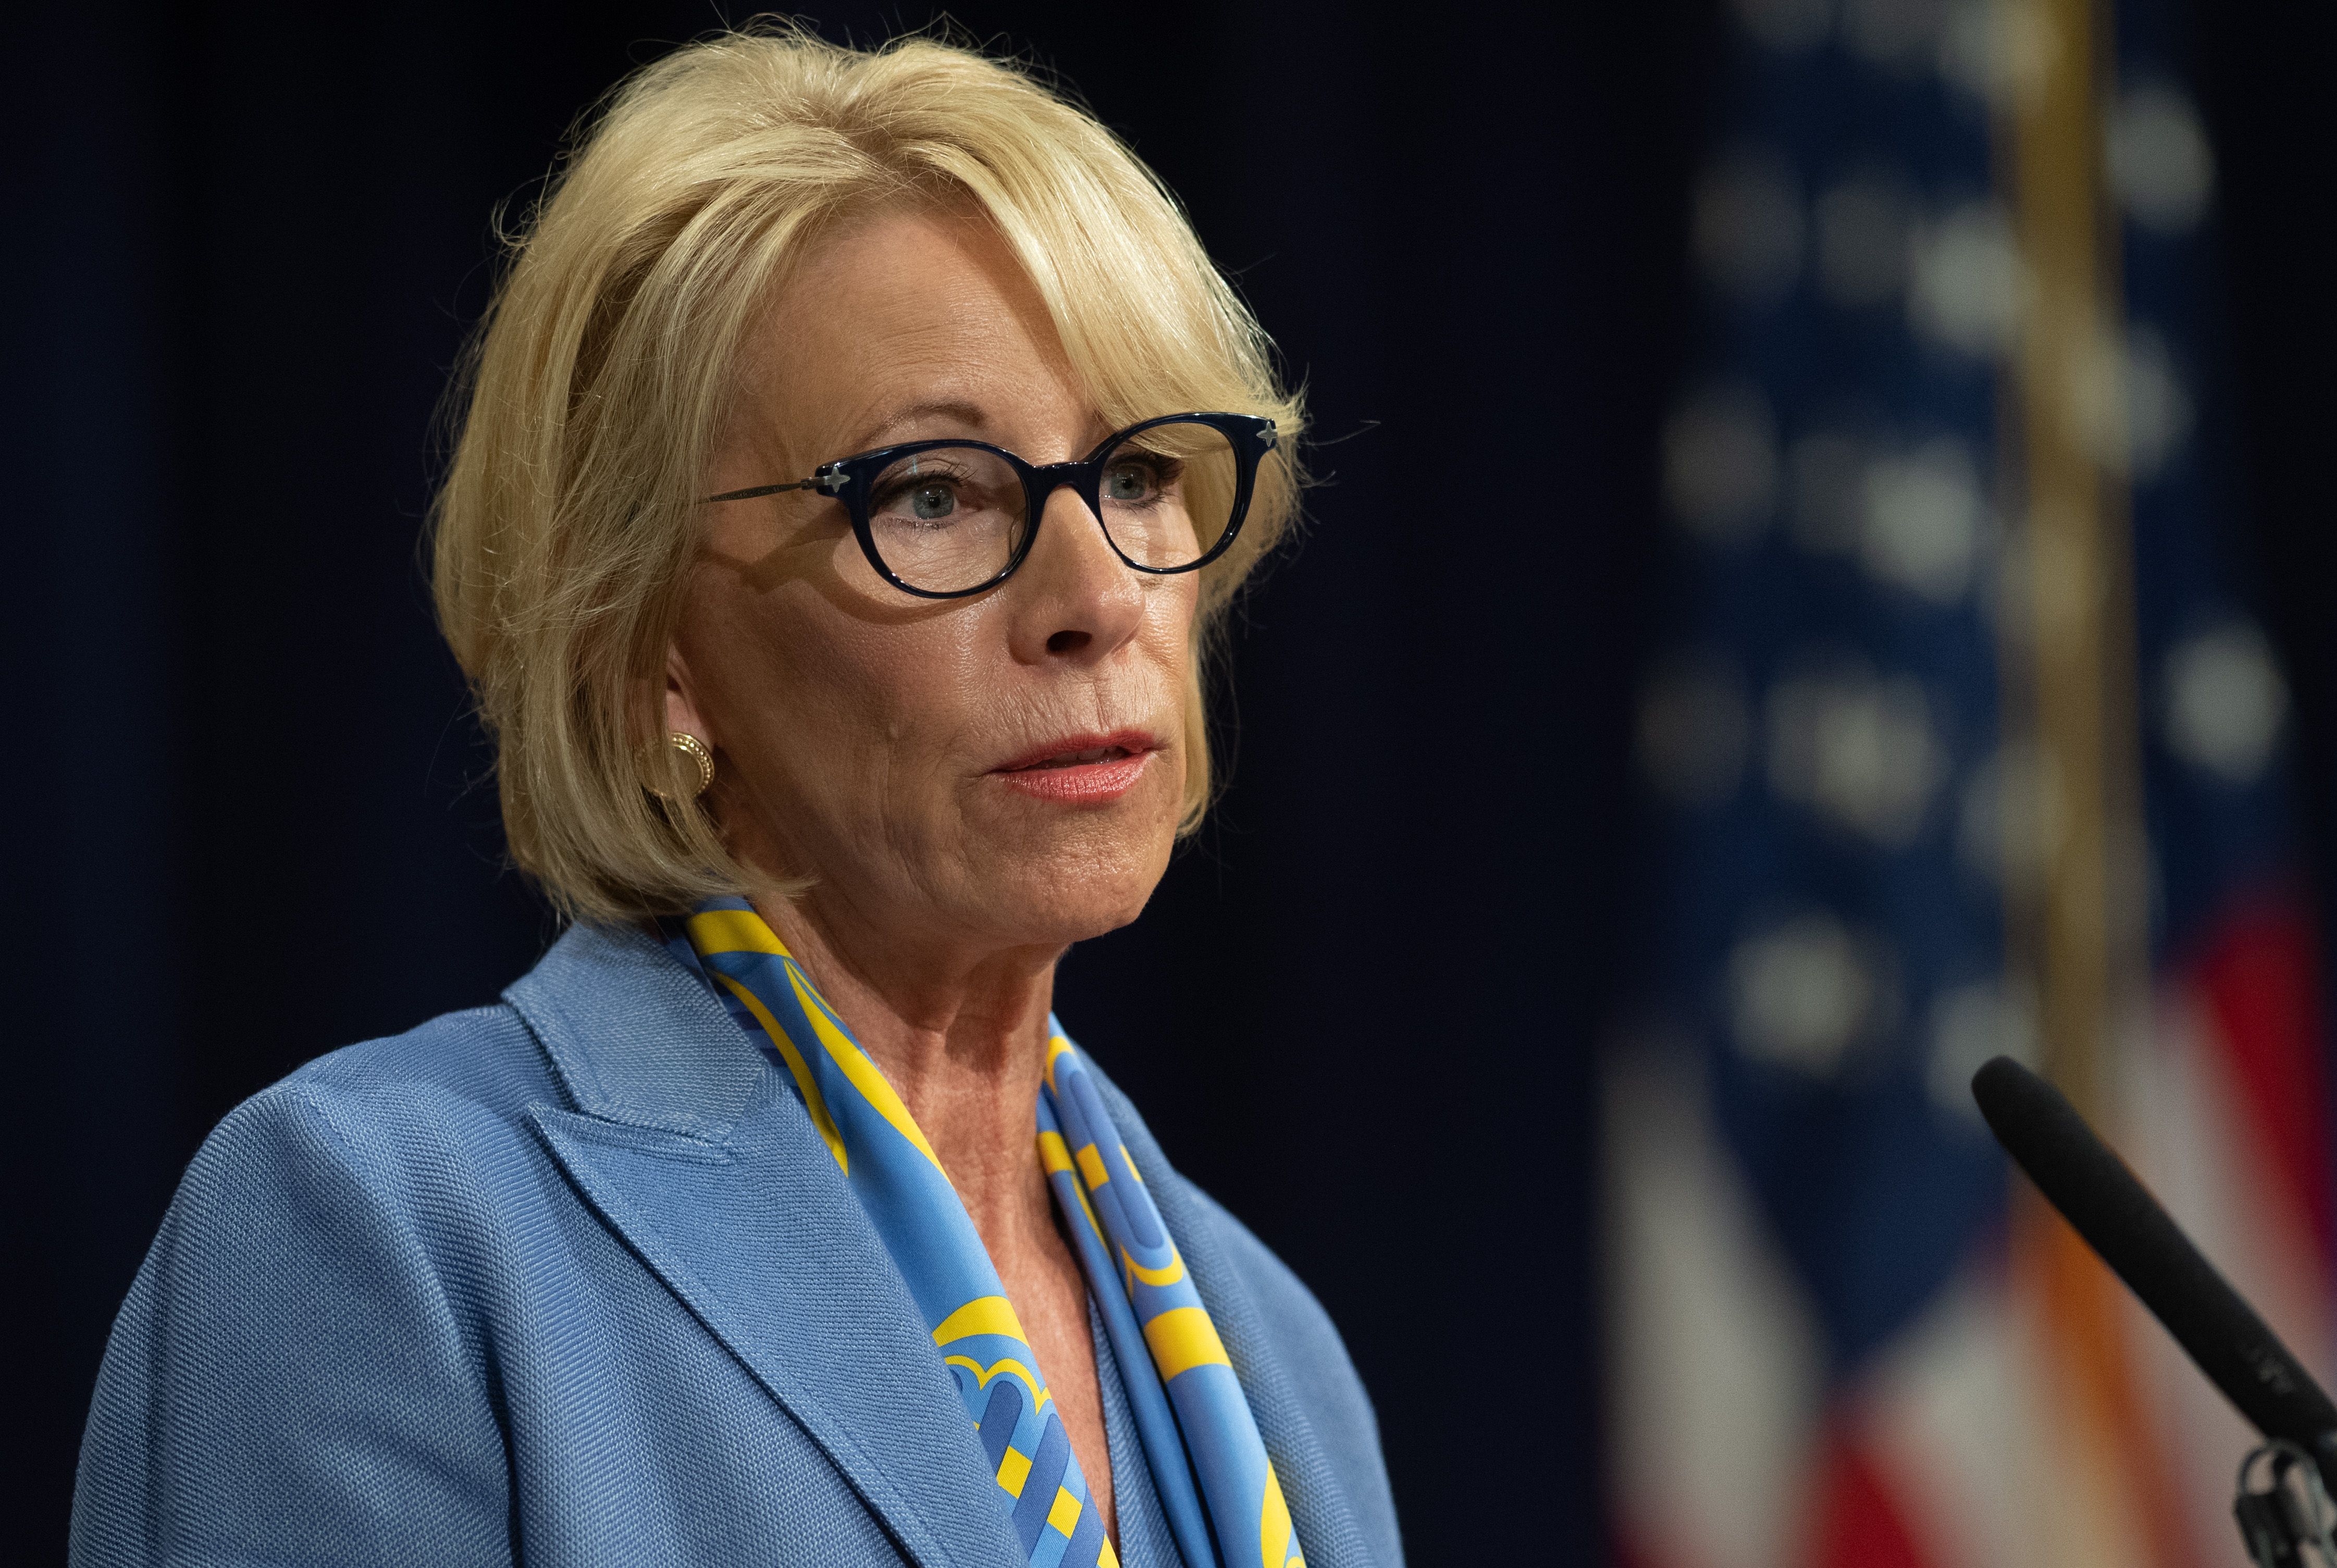 US Secretary of Education Betsy DeVos s set to pay a visit to a school that bans gay teachers